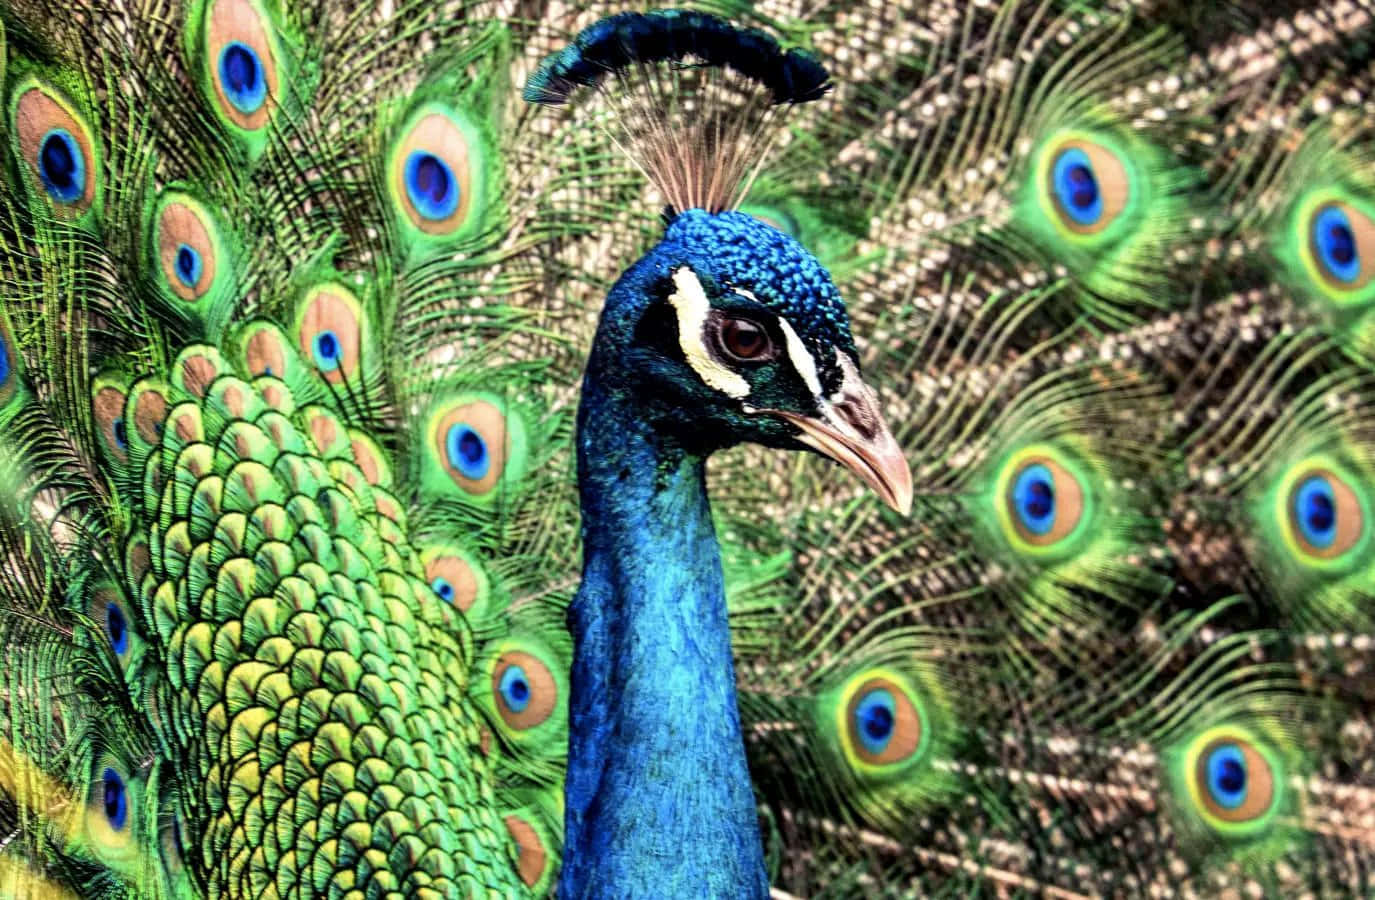 A Peacock With Many Feathers And A Bright Blue Color